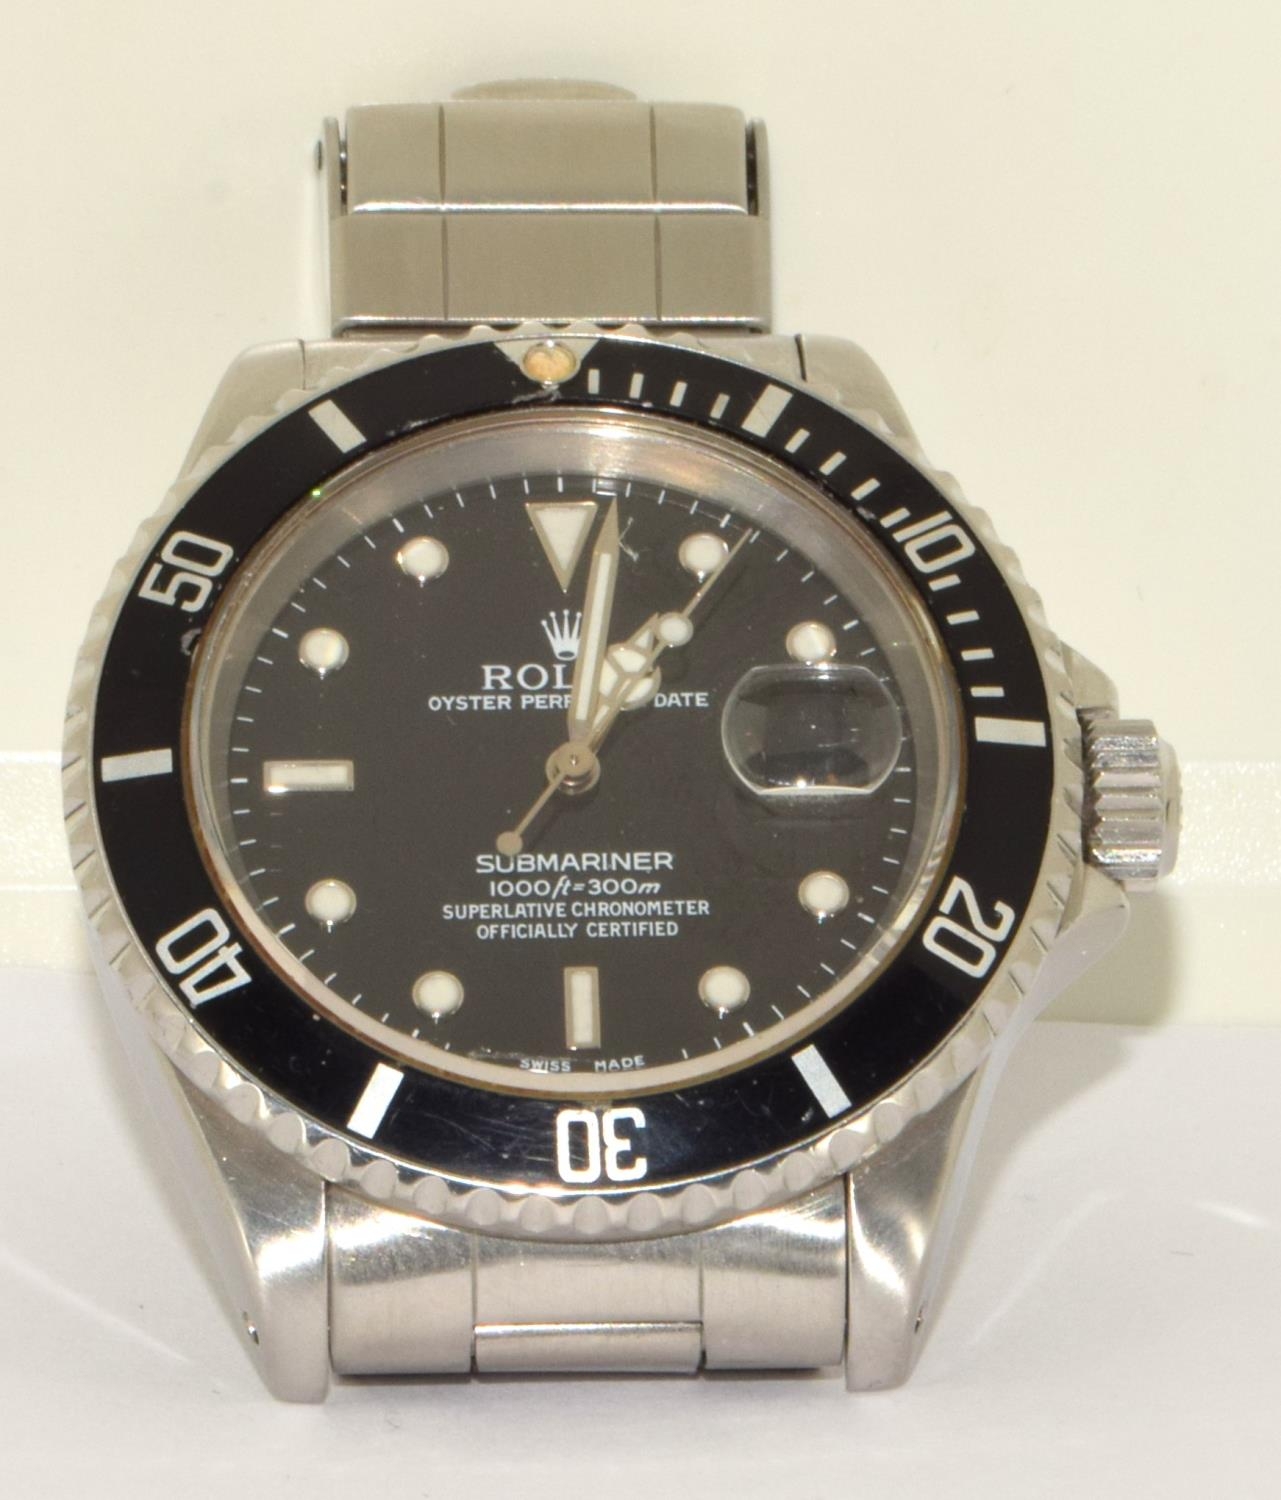 Rolex Submariner model 16610 year 1995. W72***3 bracelet 93150 clasp codes DE10 has booklet and box, - Image 9 of 9